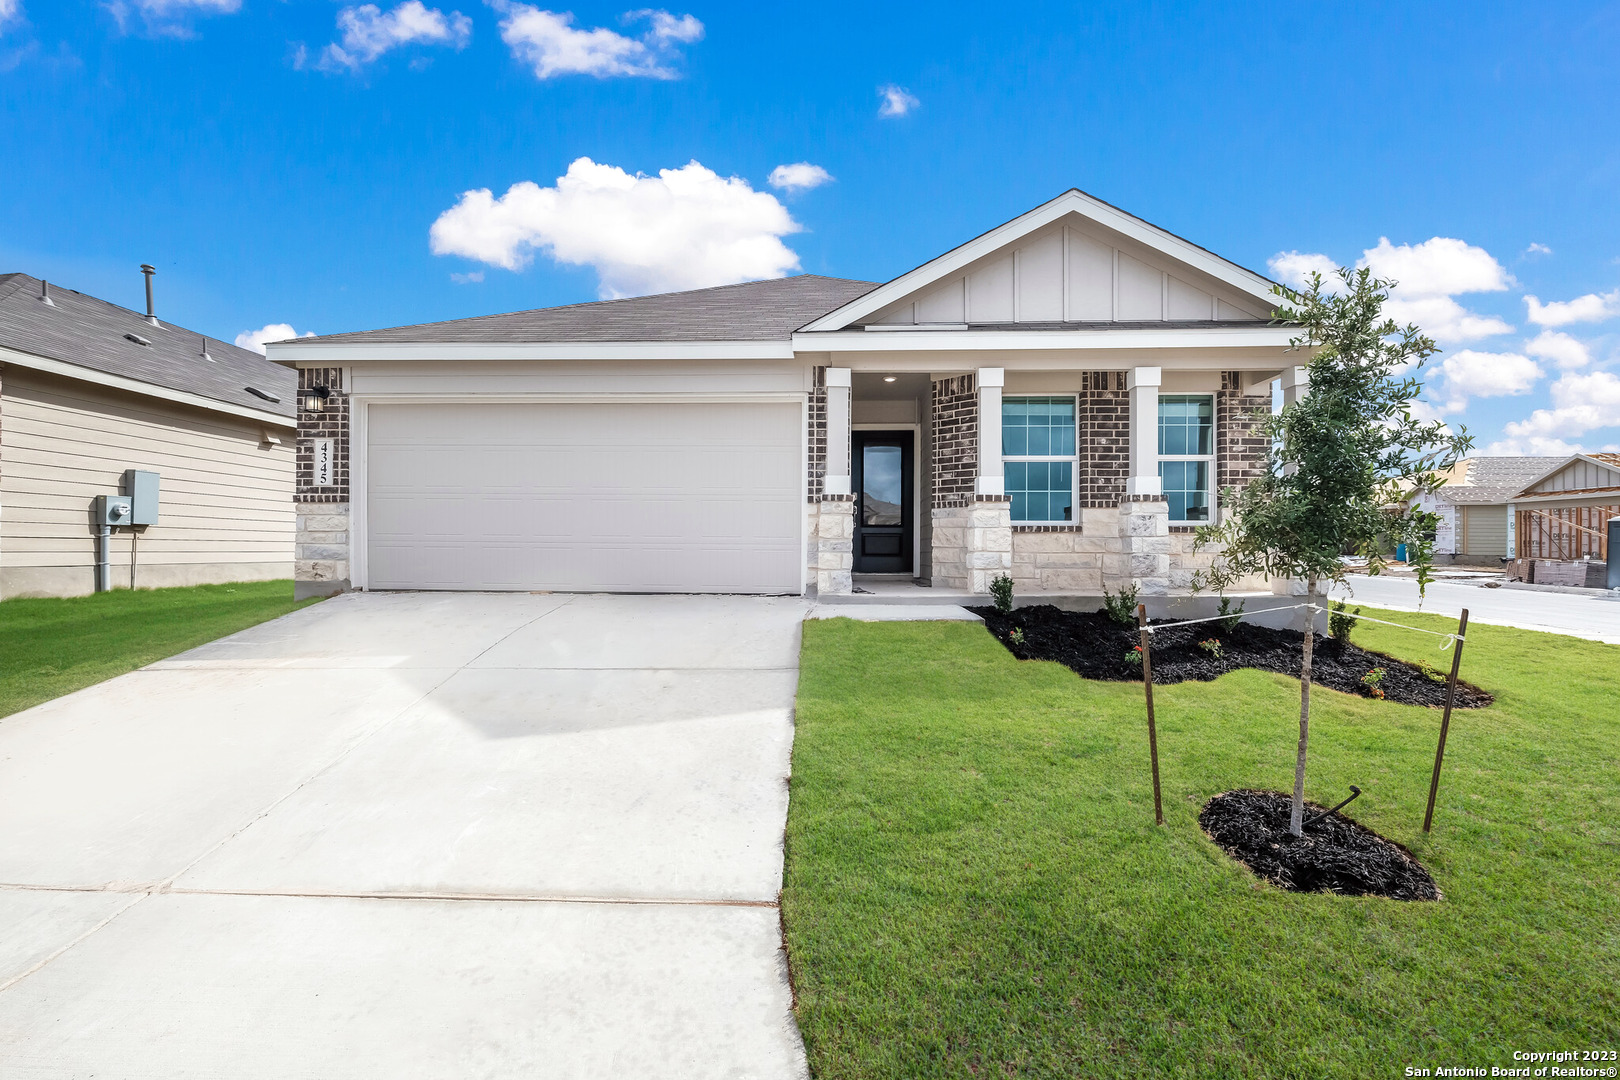 Photo of 3556 Axis Hill St in New Braunfels, TX